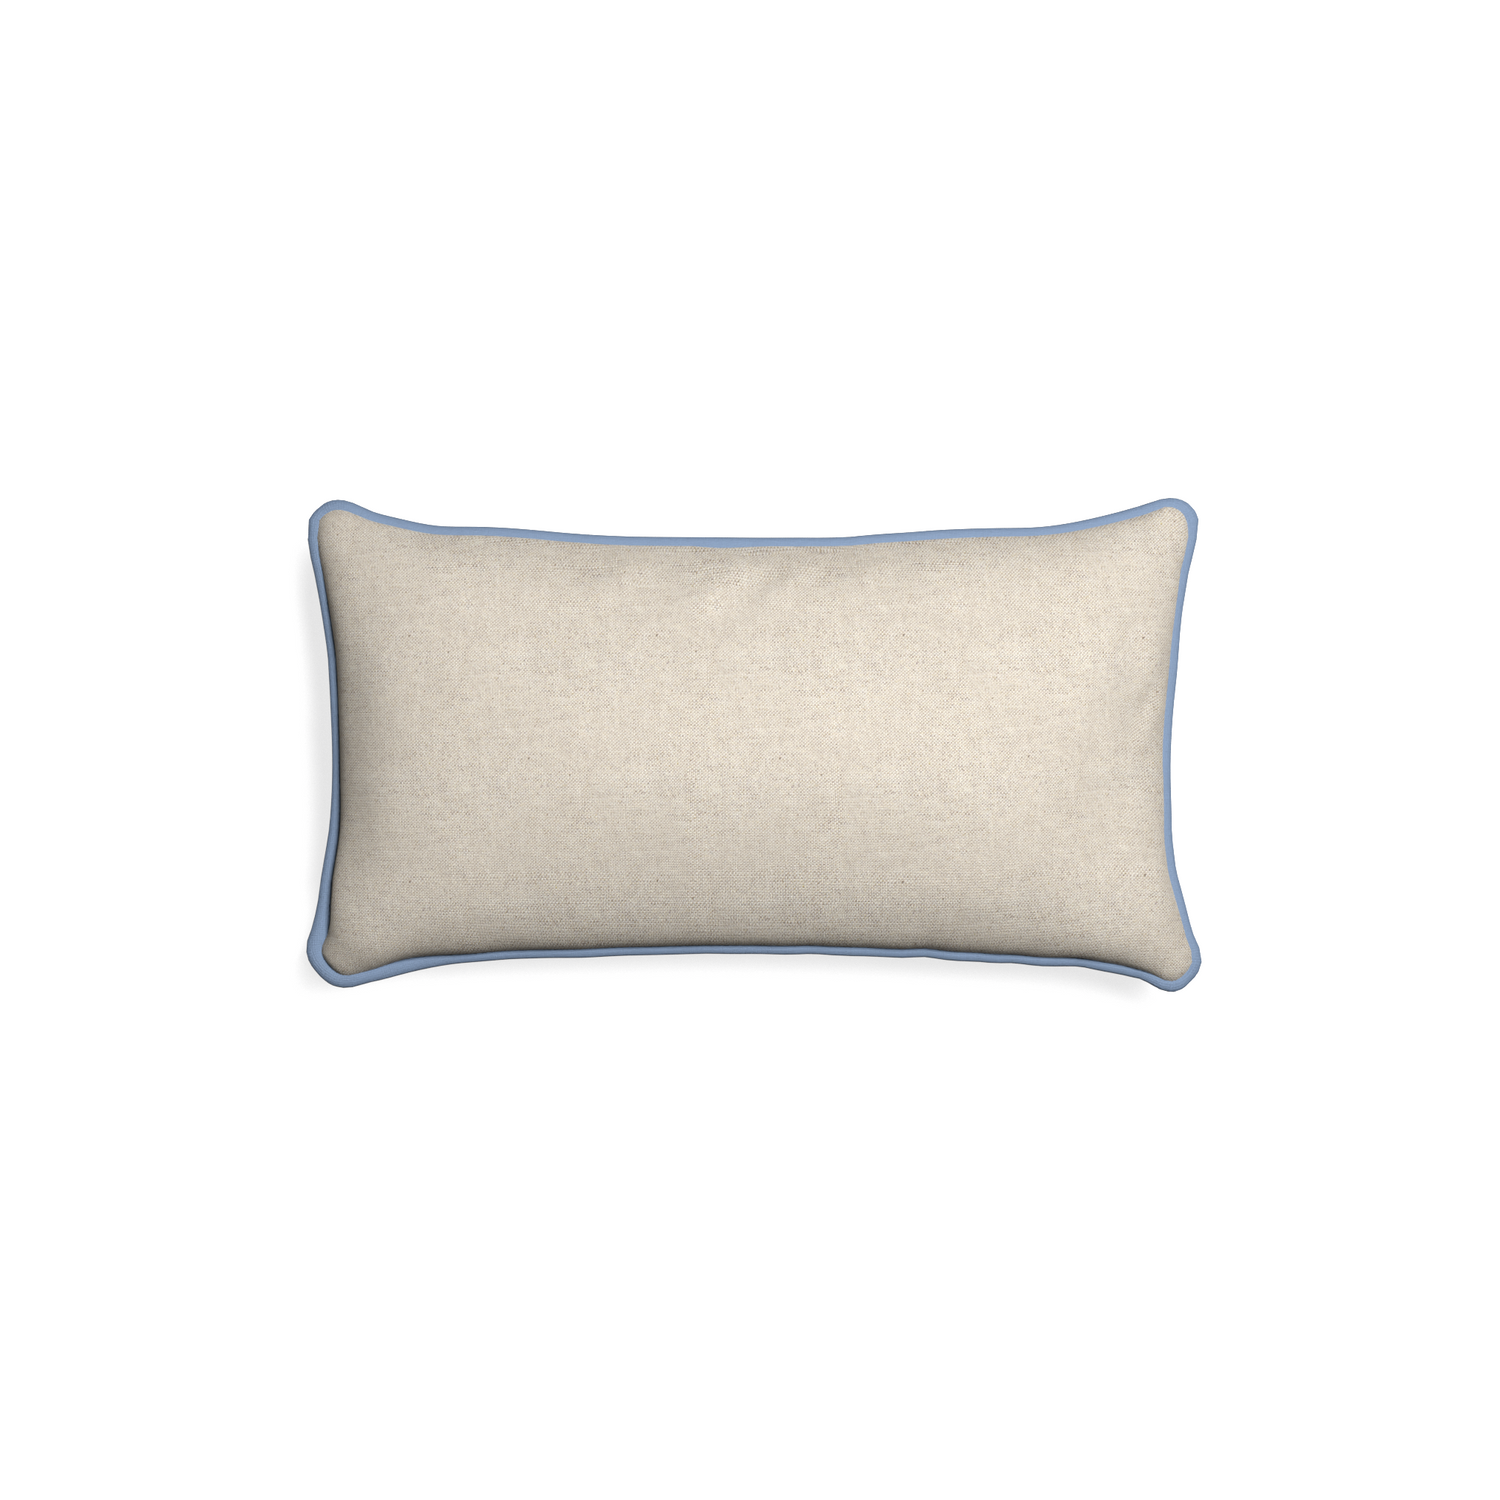 Petite-lumbar oat custom light brownpillow with sky piping on white background